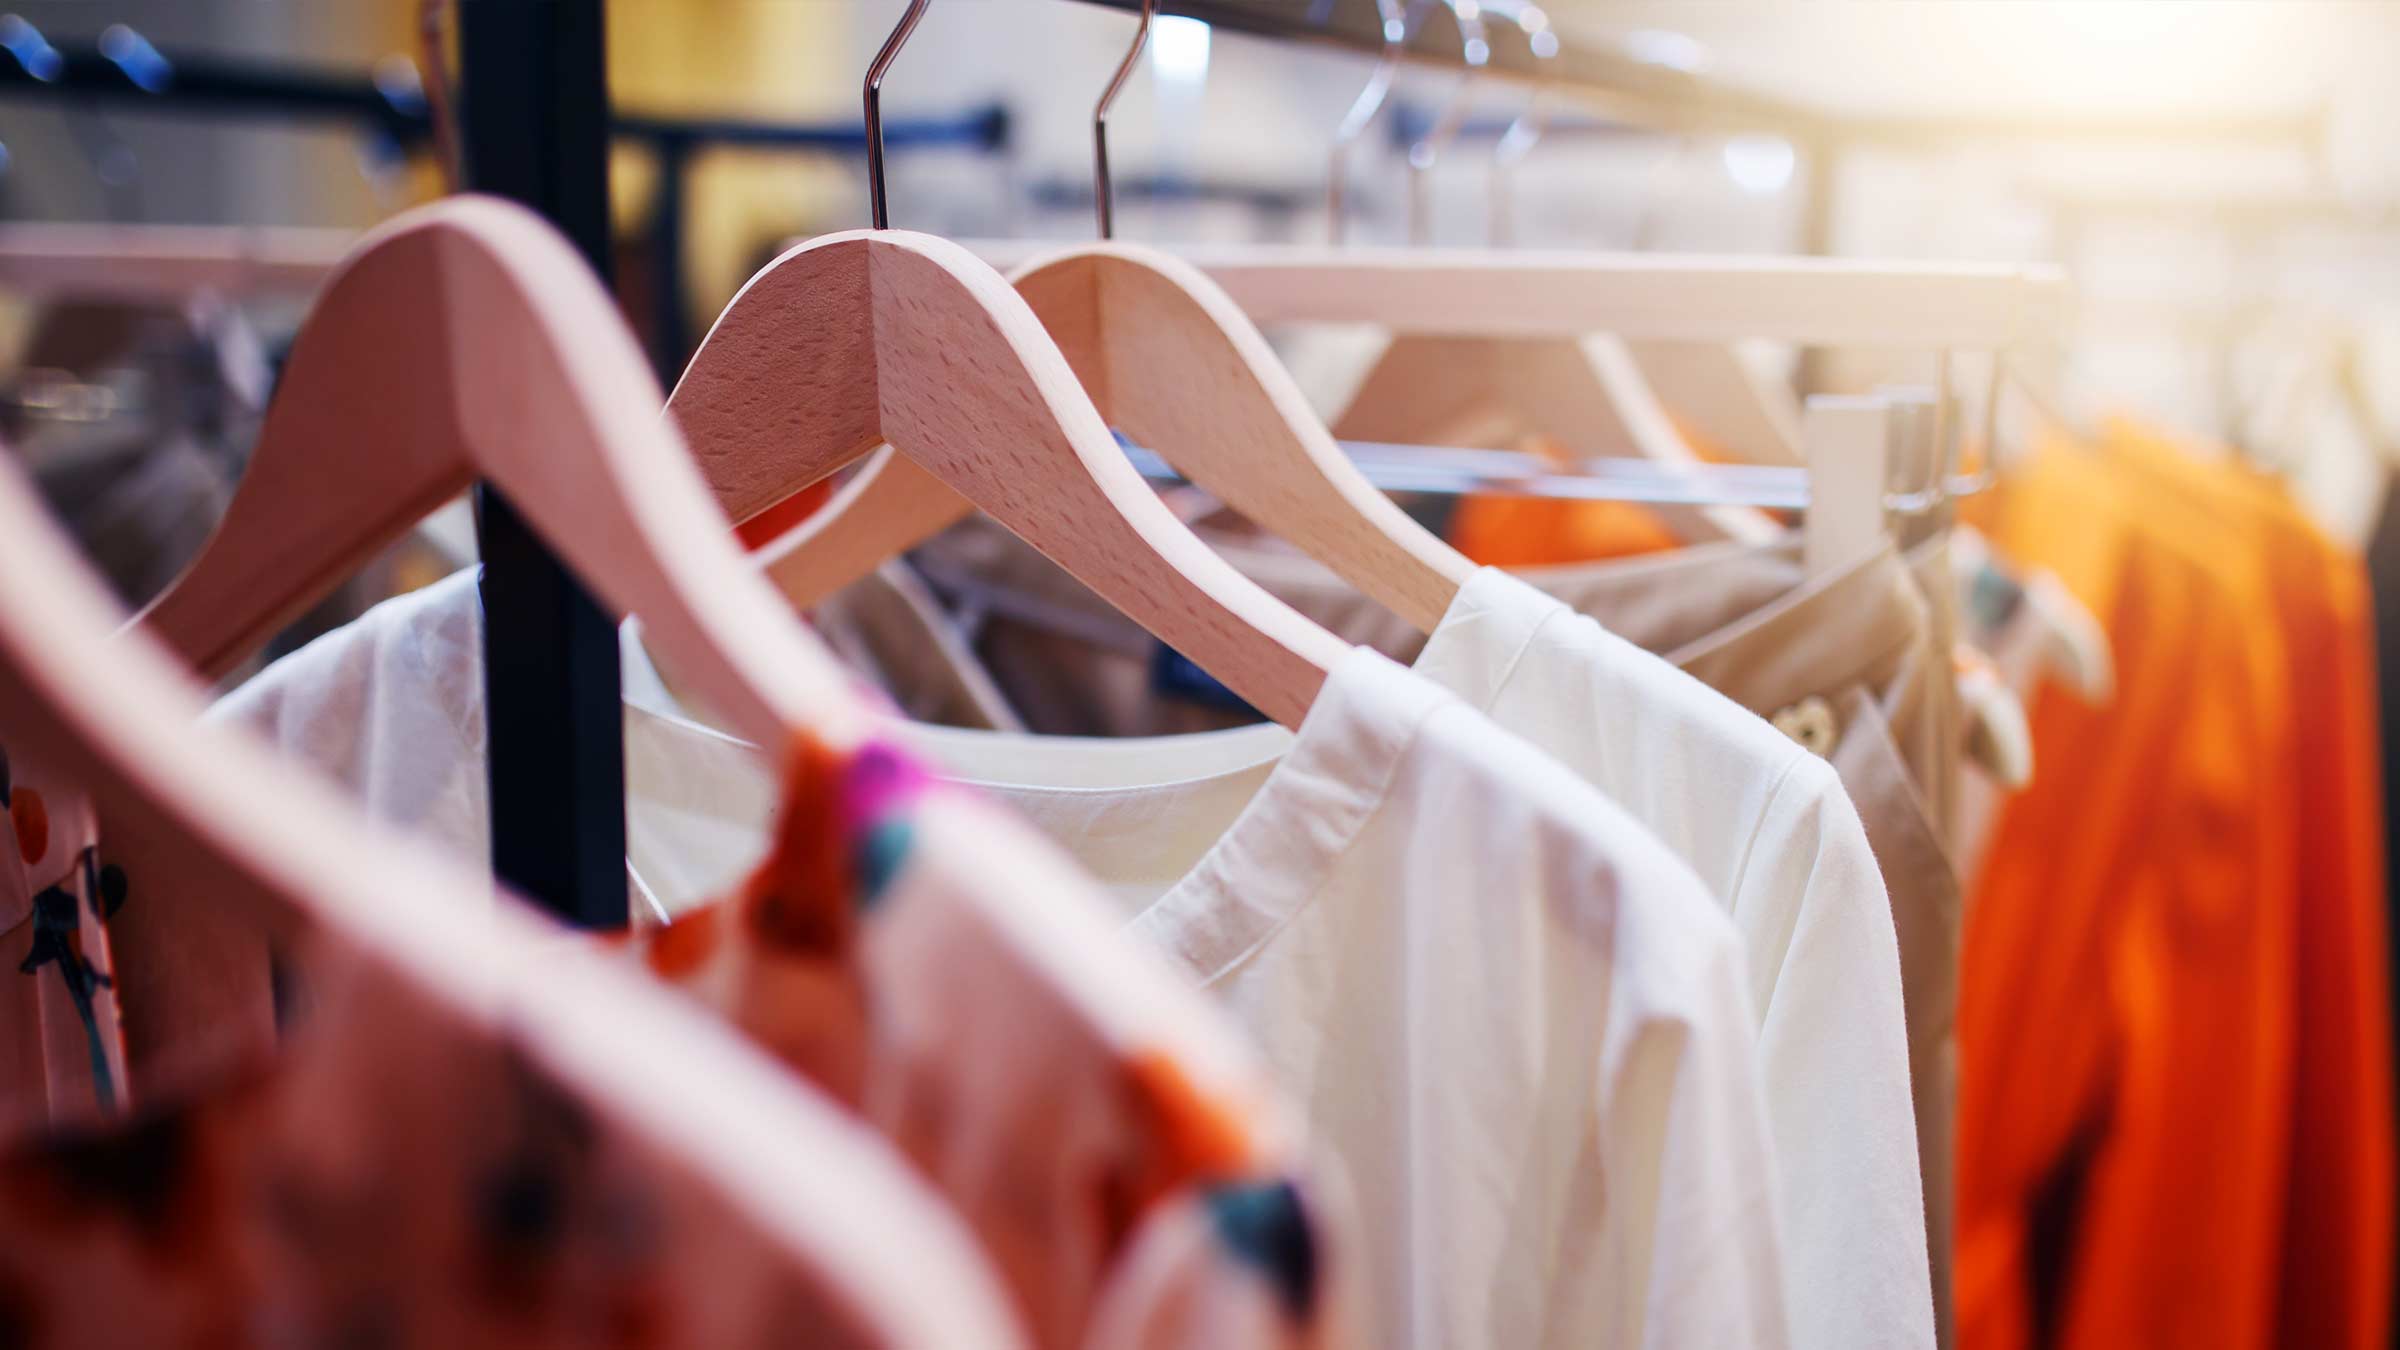 In 2019, fast fashion companies grew up